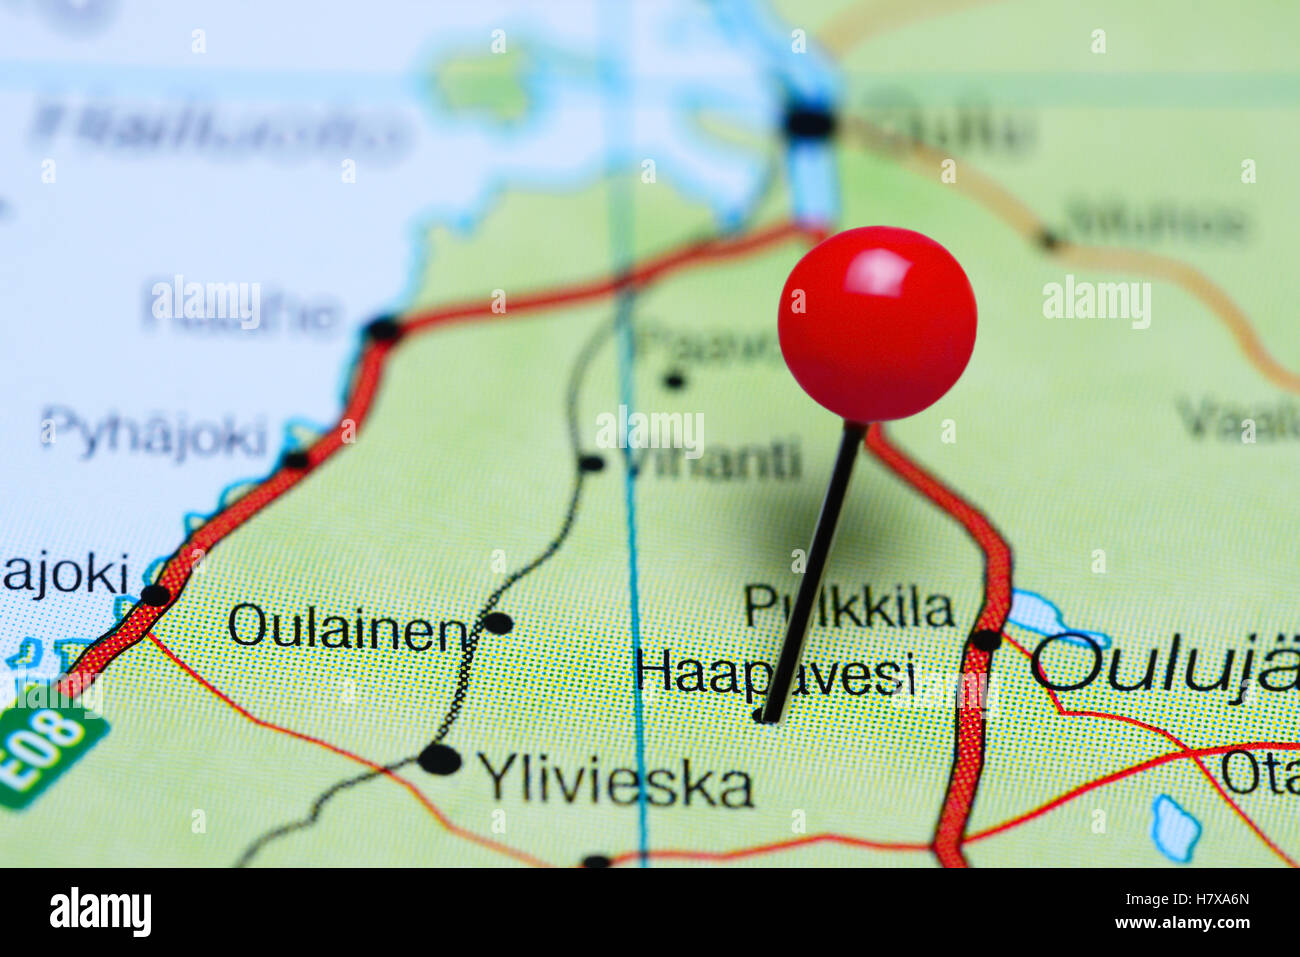 Haapavesi pinned on a map of Finland Stock Photo